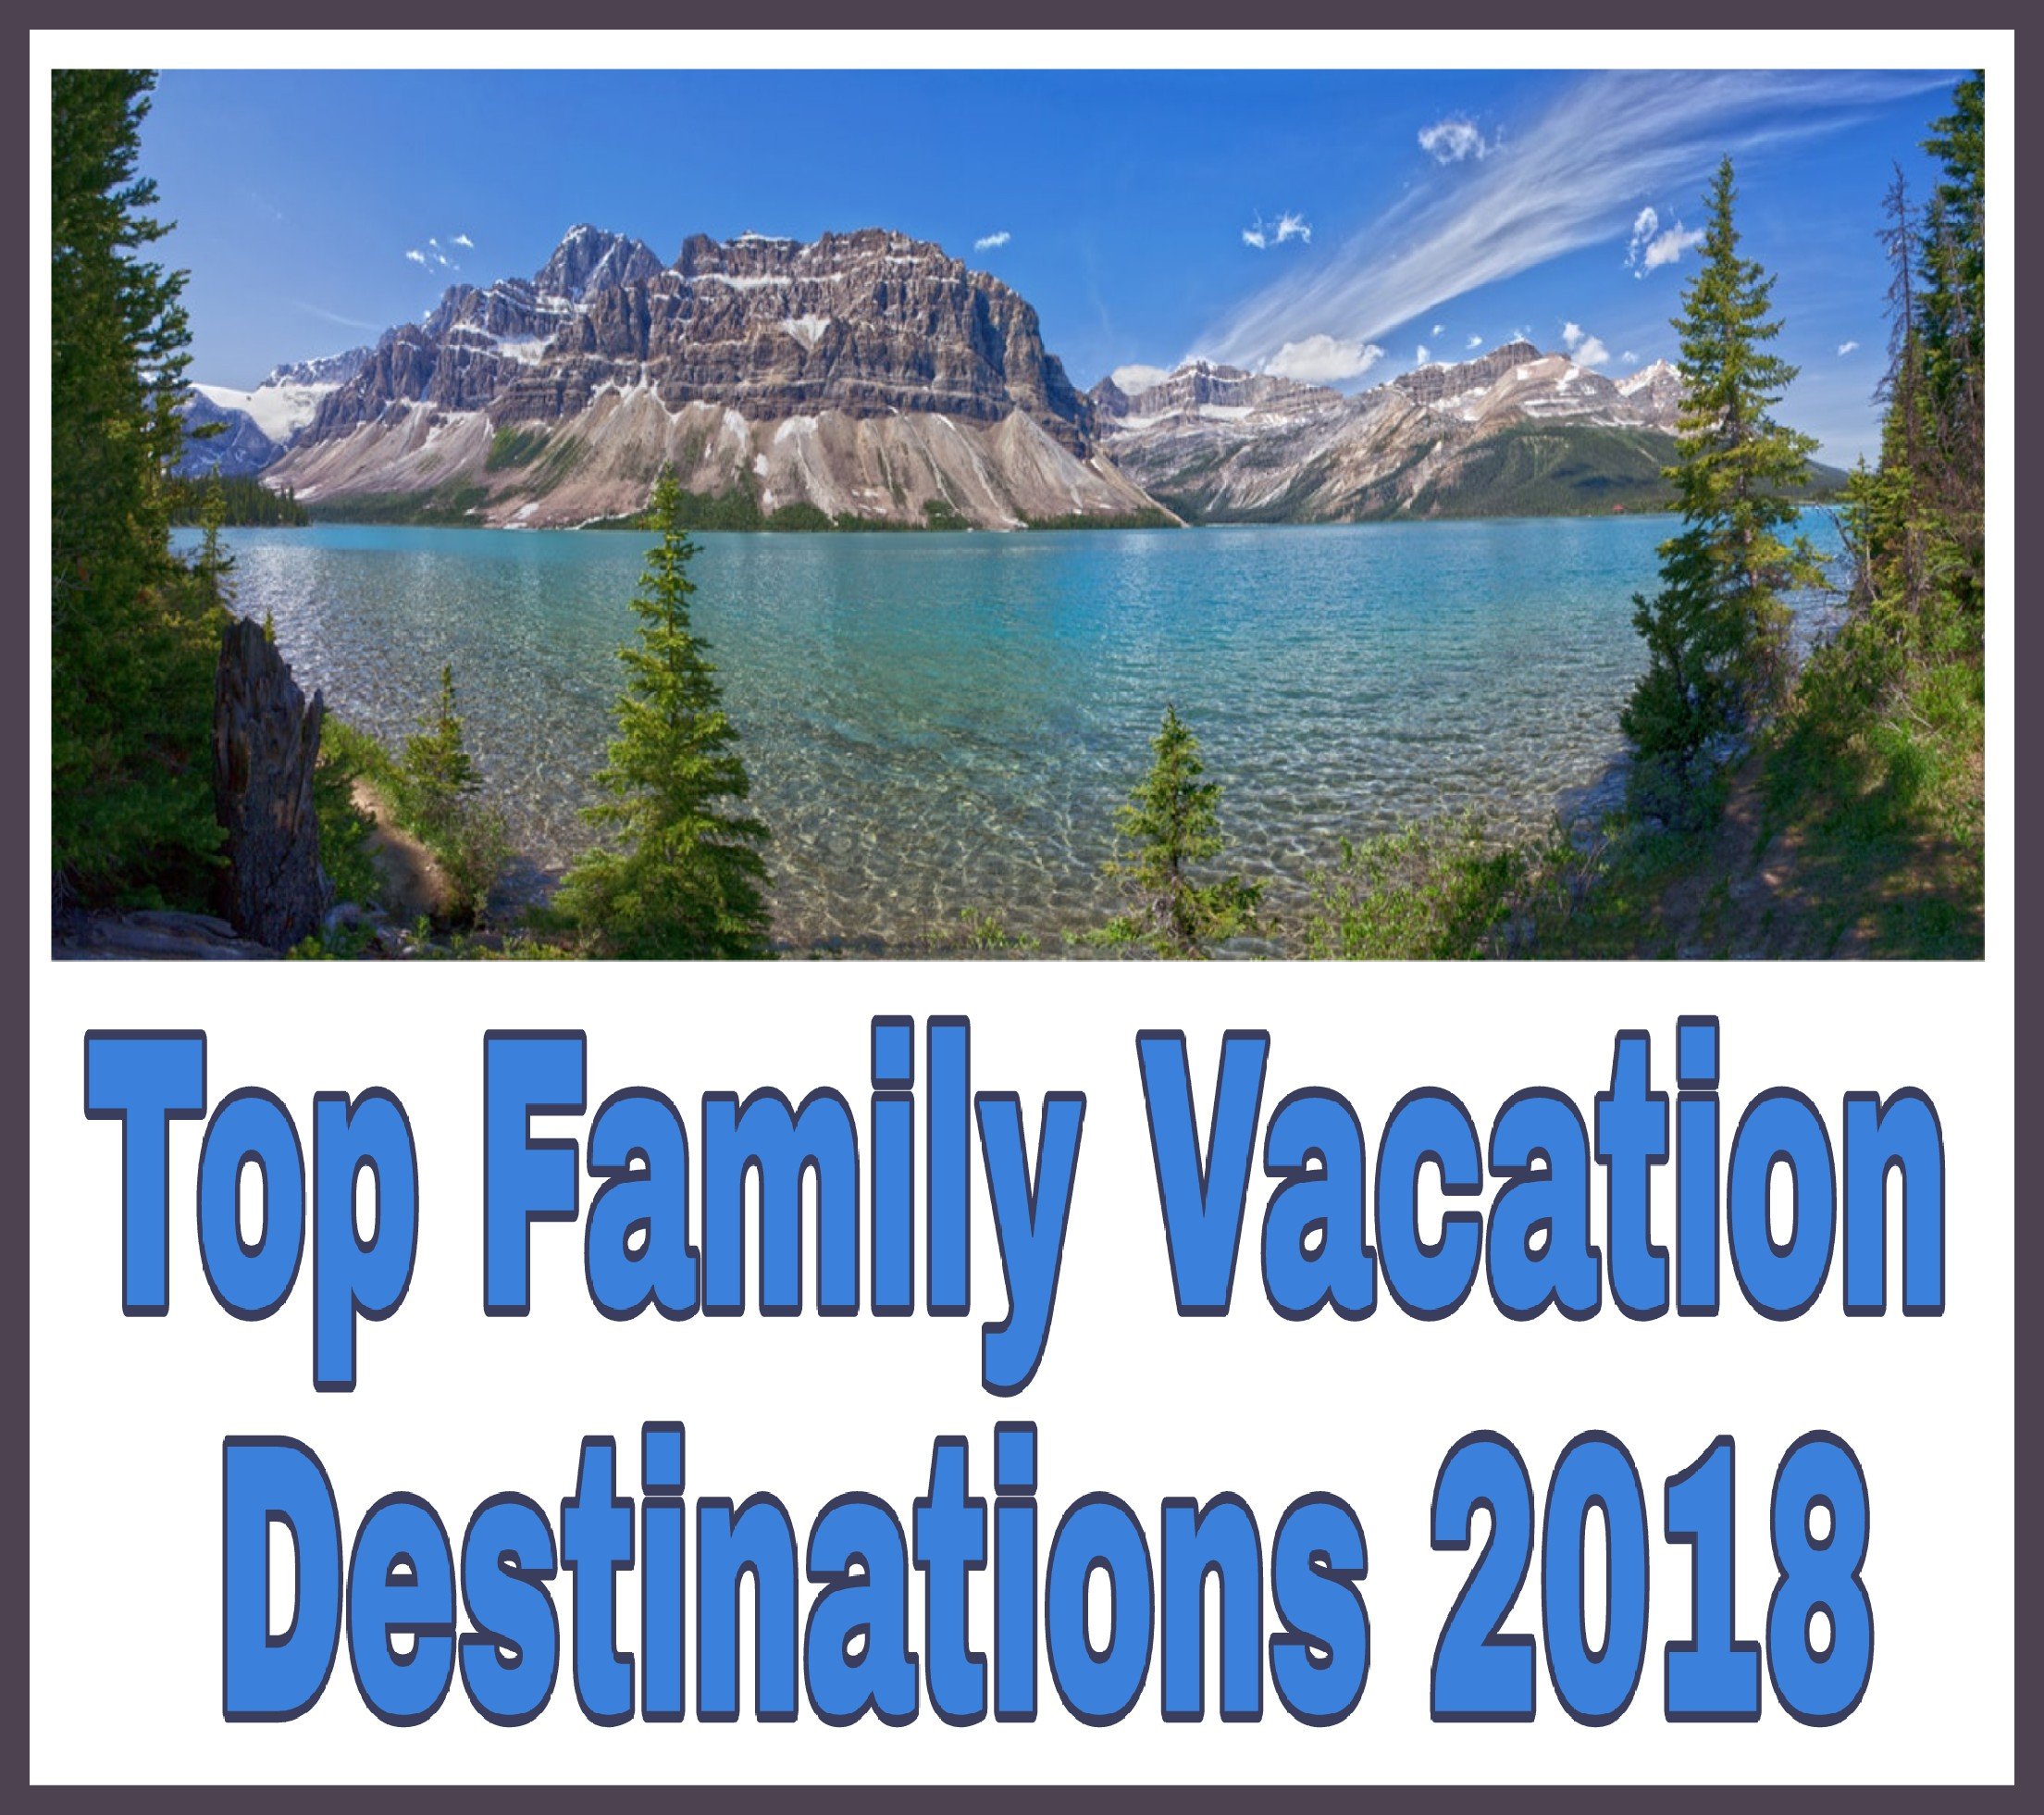 Top Family Vacation Destinations 2018 image of beautiful clear blue water, blue skies, mountains in background and green evergreens bordering the edge of the photo.